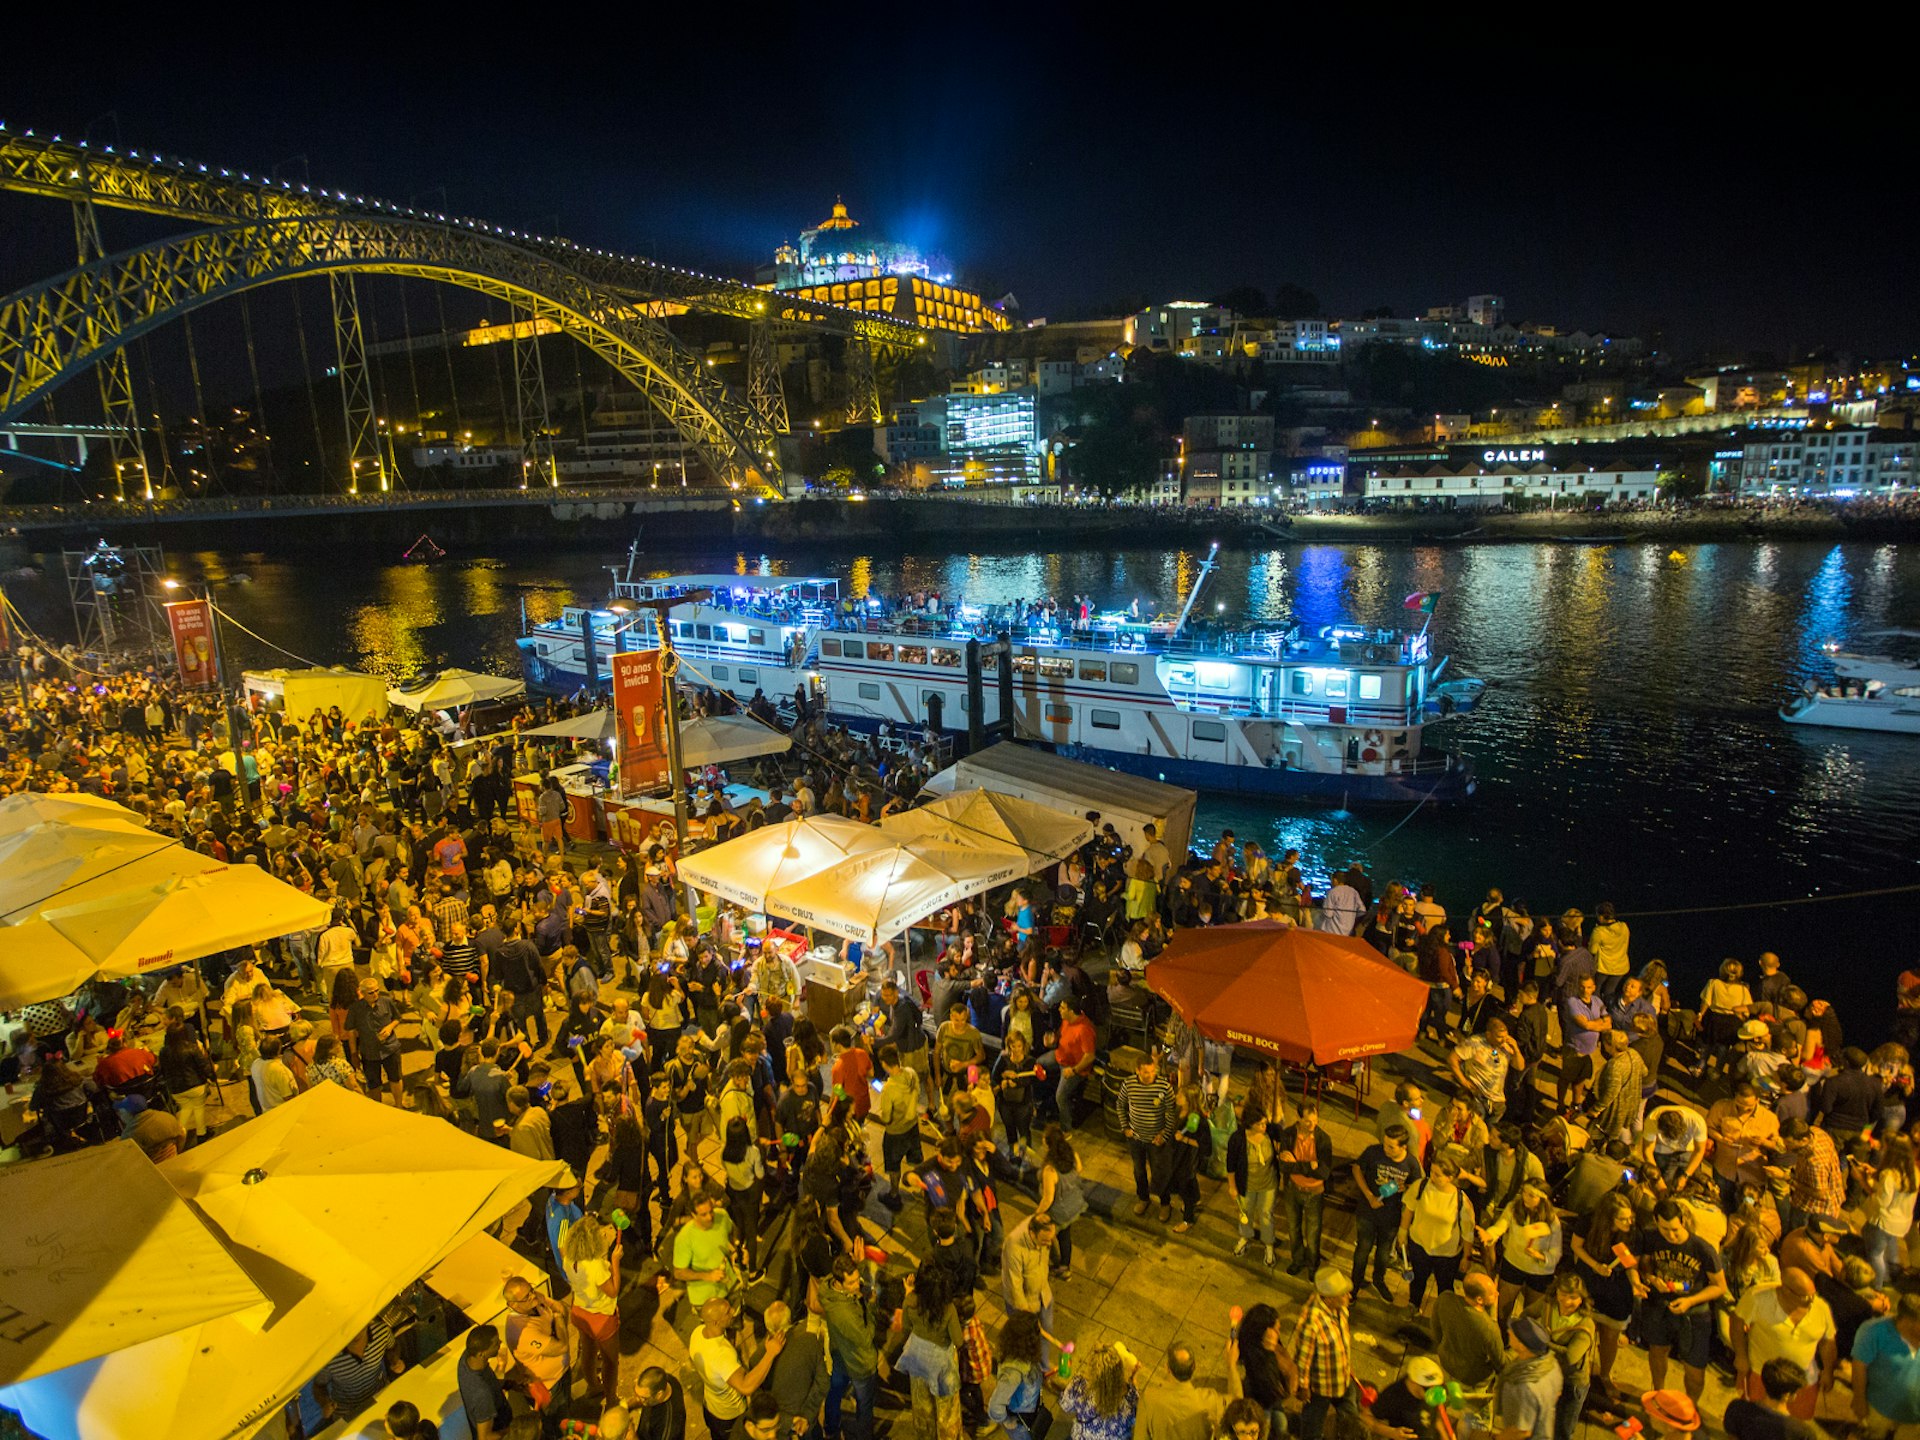 Alternative festivals - the streets of Porto awash with squeaky-hammer-wielding revellers celebrating St John. Crowds mill around market stalls at night, alongside a river with several boats and a huge iron bridge in the background